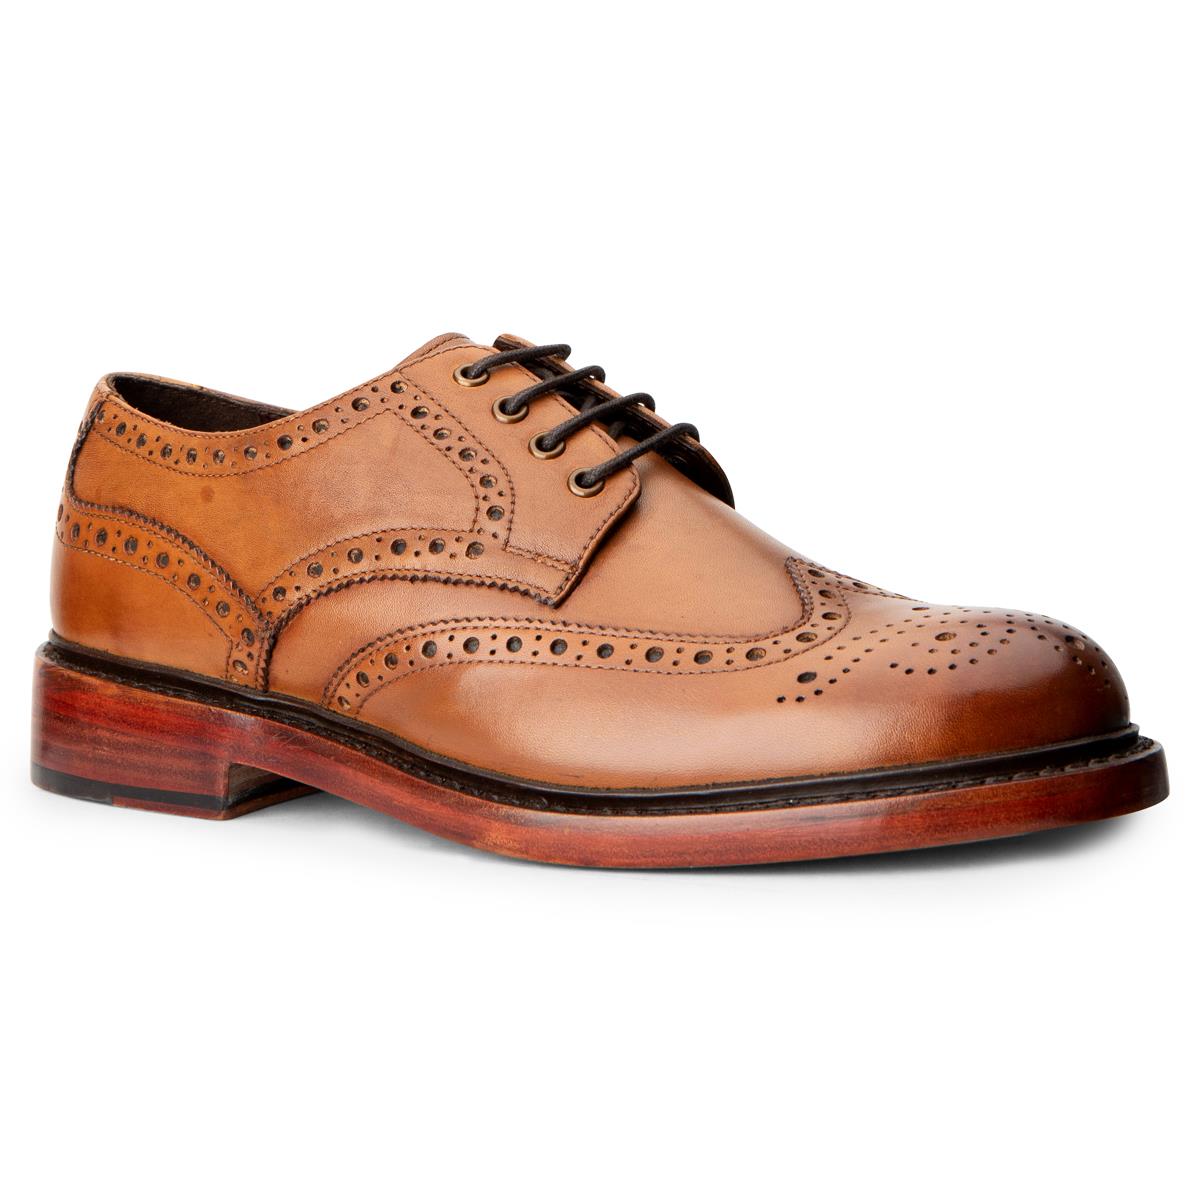 Hoggs Of Fife Mens Muirfield Brogue Shoes Questions & Answers